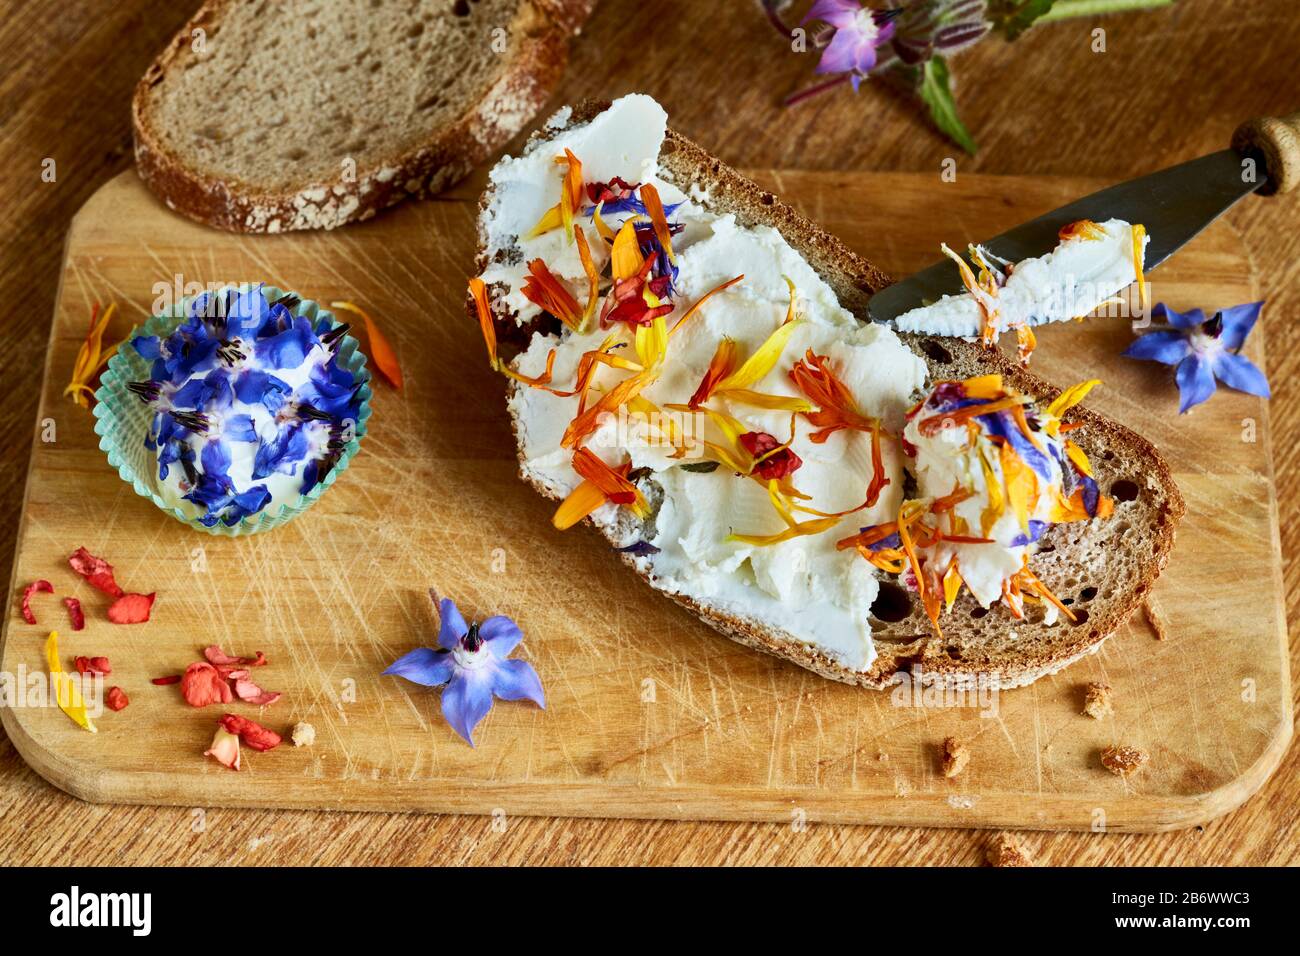 Children investigating food. Edible flowers on a slice of bread with cream cheese. Learning according to the Reggio Pedagogy principle, playful understanding and discovery. Germany. Stock Photo